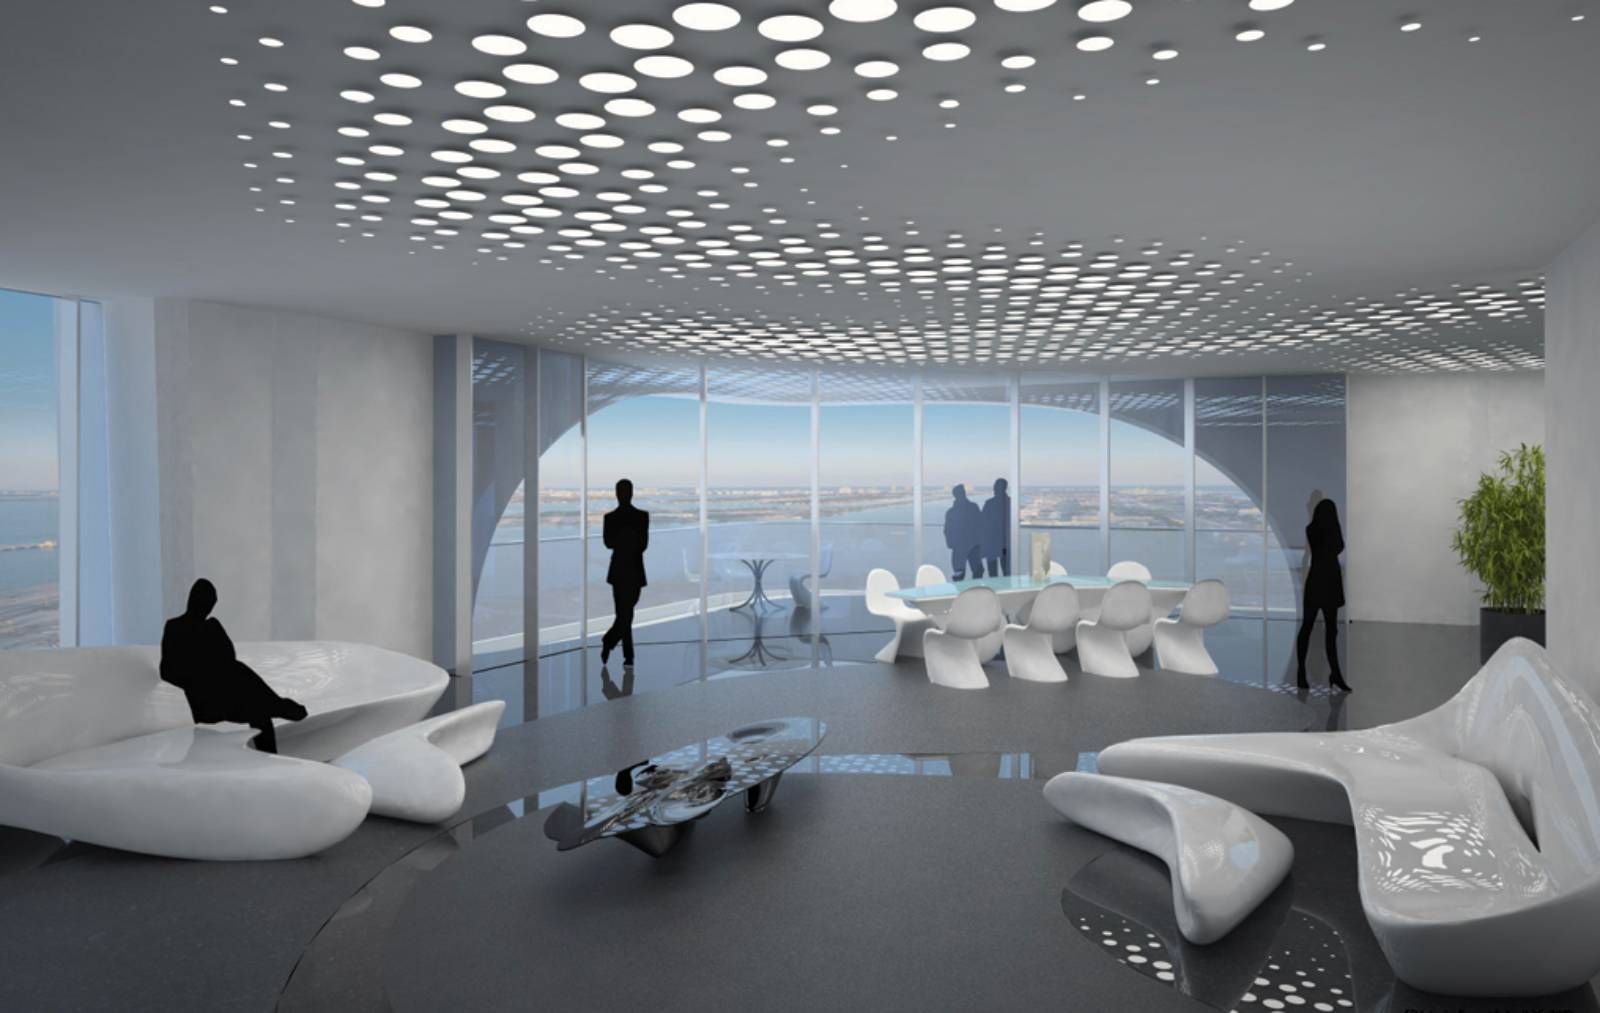 Designing futuristic workspaces for better collaboration